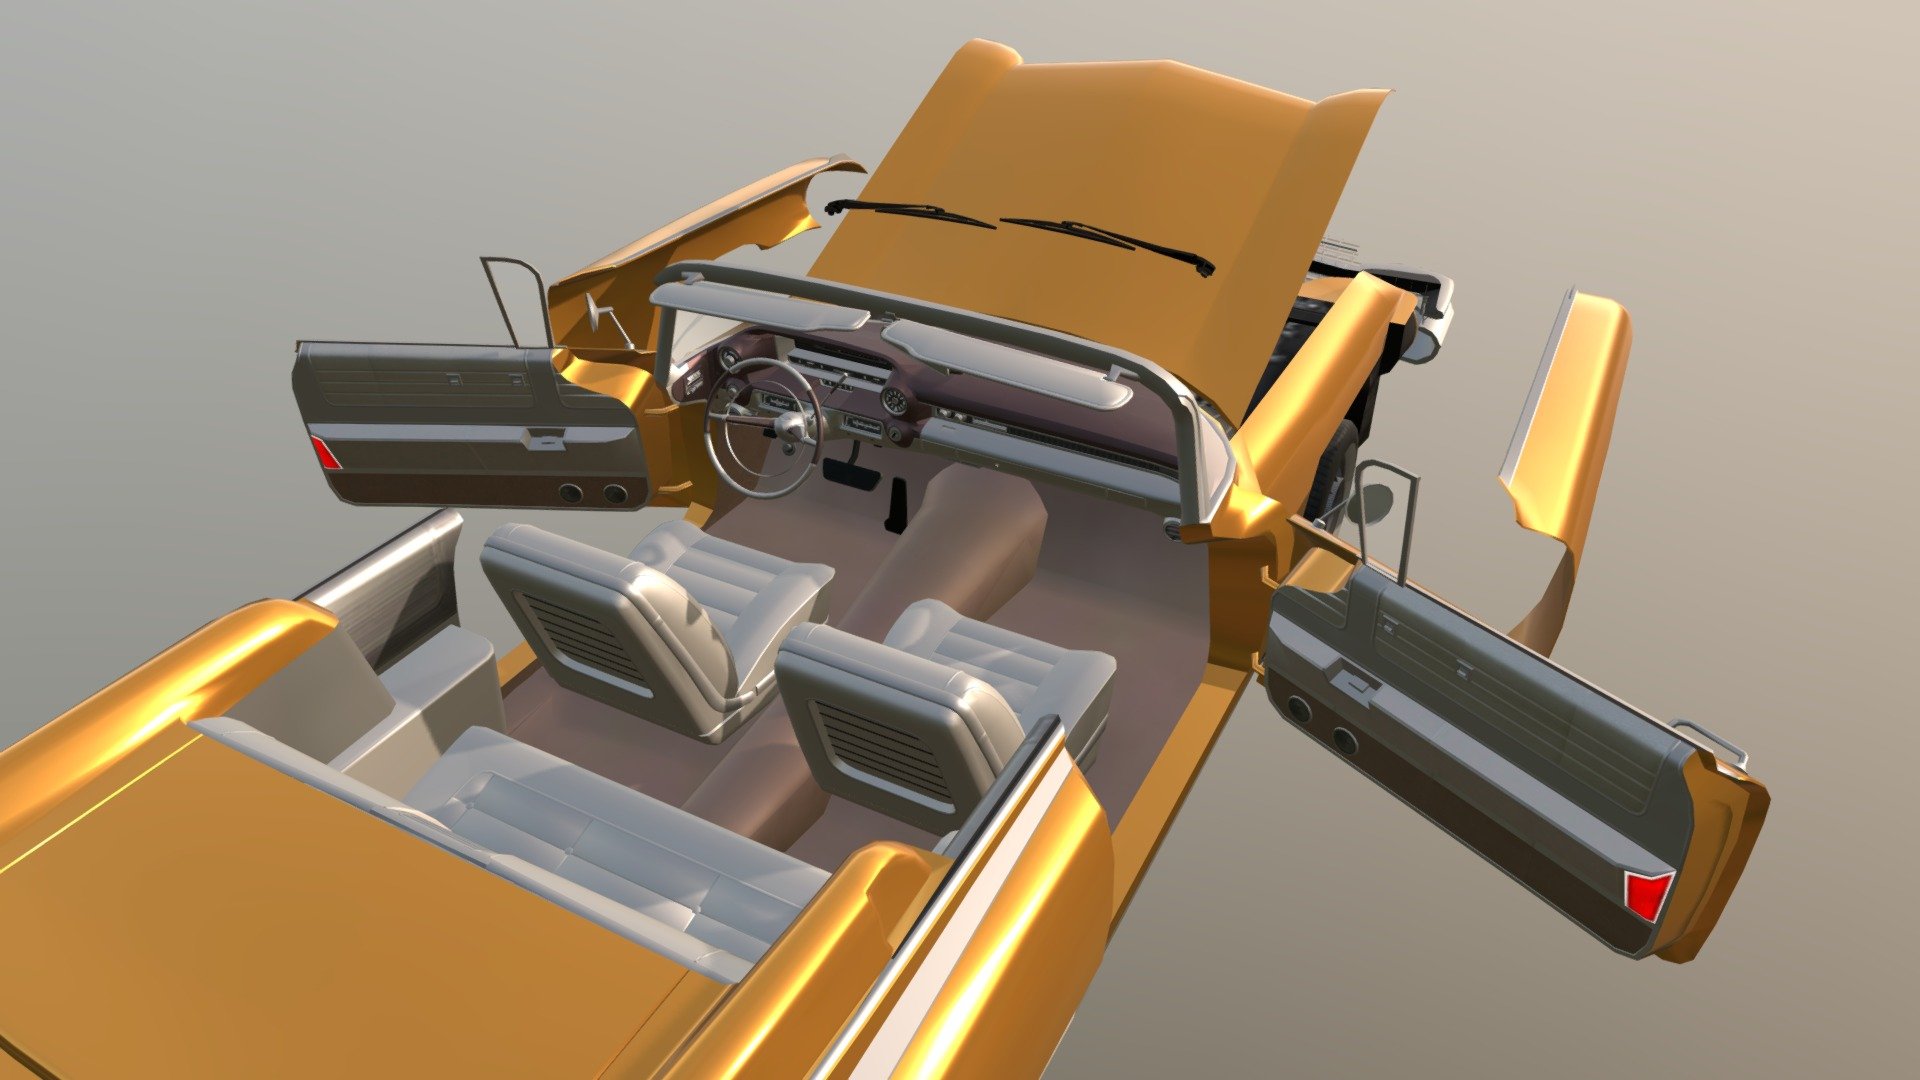 Package Contains a Beautiful Car model with fully textured Good Quality Interior and open-able doors, Bonnet, Boot etc. Ready to use in Your game. This model has 4 LODs and using Atlas Texture so it can be used for PC and mobile projects.
Perfect for any Games like Third-Person Games, First-Person Games, Car Destruction Games or any other Car Games. 

Our Real Car 9 and Real Car 9 Separated parts are same models.

LOD Details: 

-LOD0: 43907 tris 
-LOD1: 23930 tris 
-LOD2: 9119 tris 
-LOD3: 72 tris 




Materials using PBR Unity Standard shader. Albedo, metallic, smoothness, normal and occlusion textures included. 

Car only using one single Atlas PBR Texture.

Car using Four Materials Paint,Interior,Glass,Mirror.

Emissive texture for lights included. 

Model is properly scaled and aligned along Z-axis. 

Fully textured Good Quality Interior and Exterior.

Separated four wheels,

Separated steering wheel and dashboard pointers. 

Separated glasses,Doors,Front and Back Bumper,Bonnet and Boot.
 - Real Car 9 Separated Parts - 3D model by Maker Games Studios (@MakerGamesStudios) 3d model